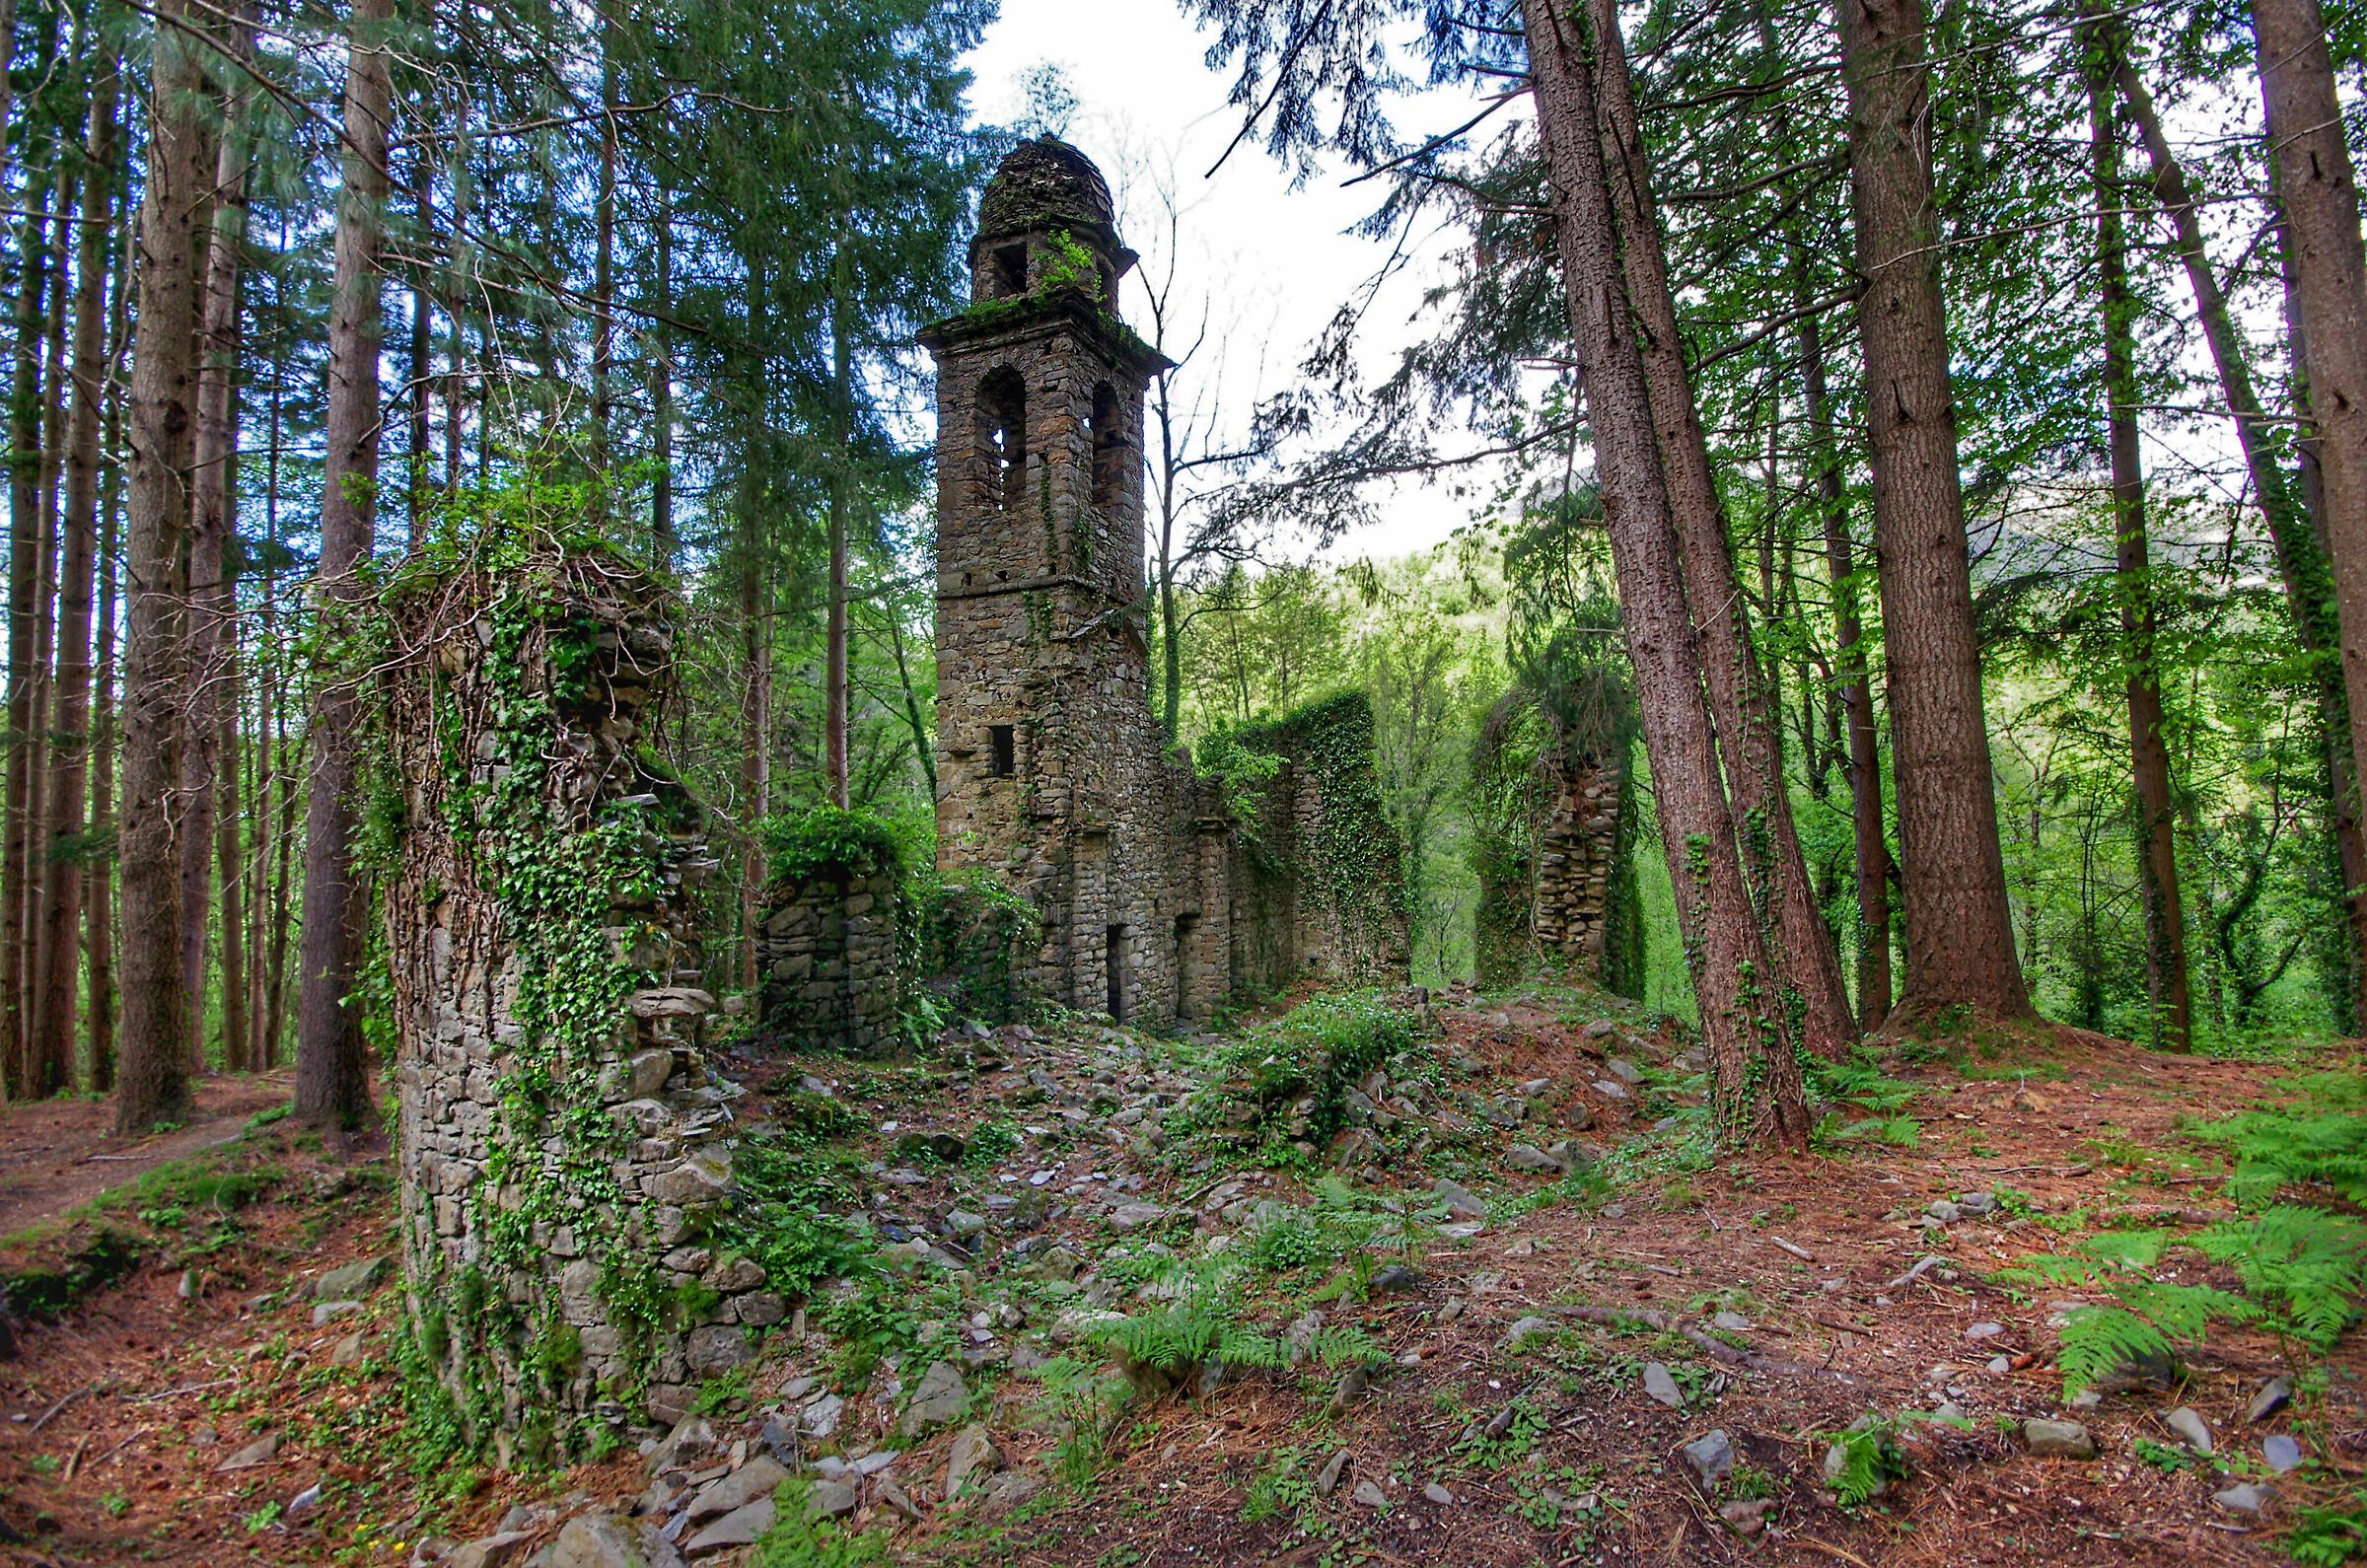 The church in the Woods...